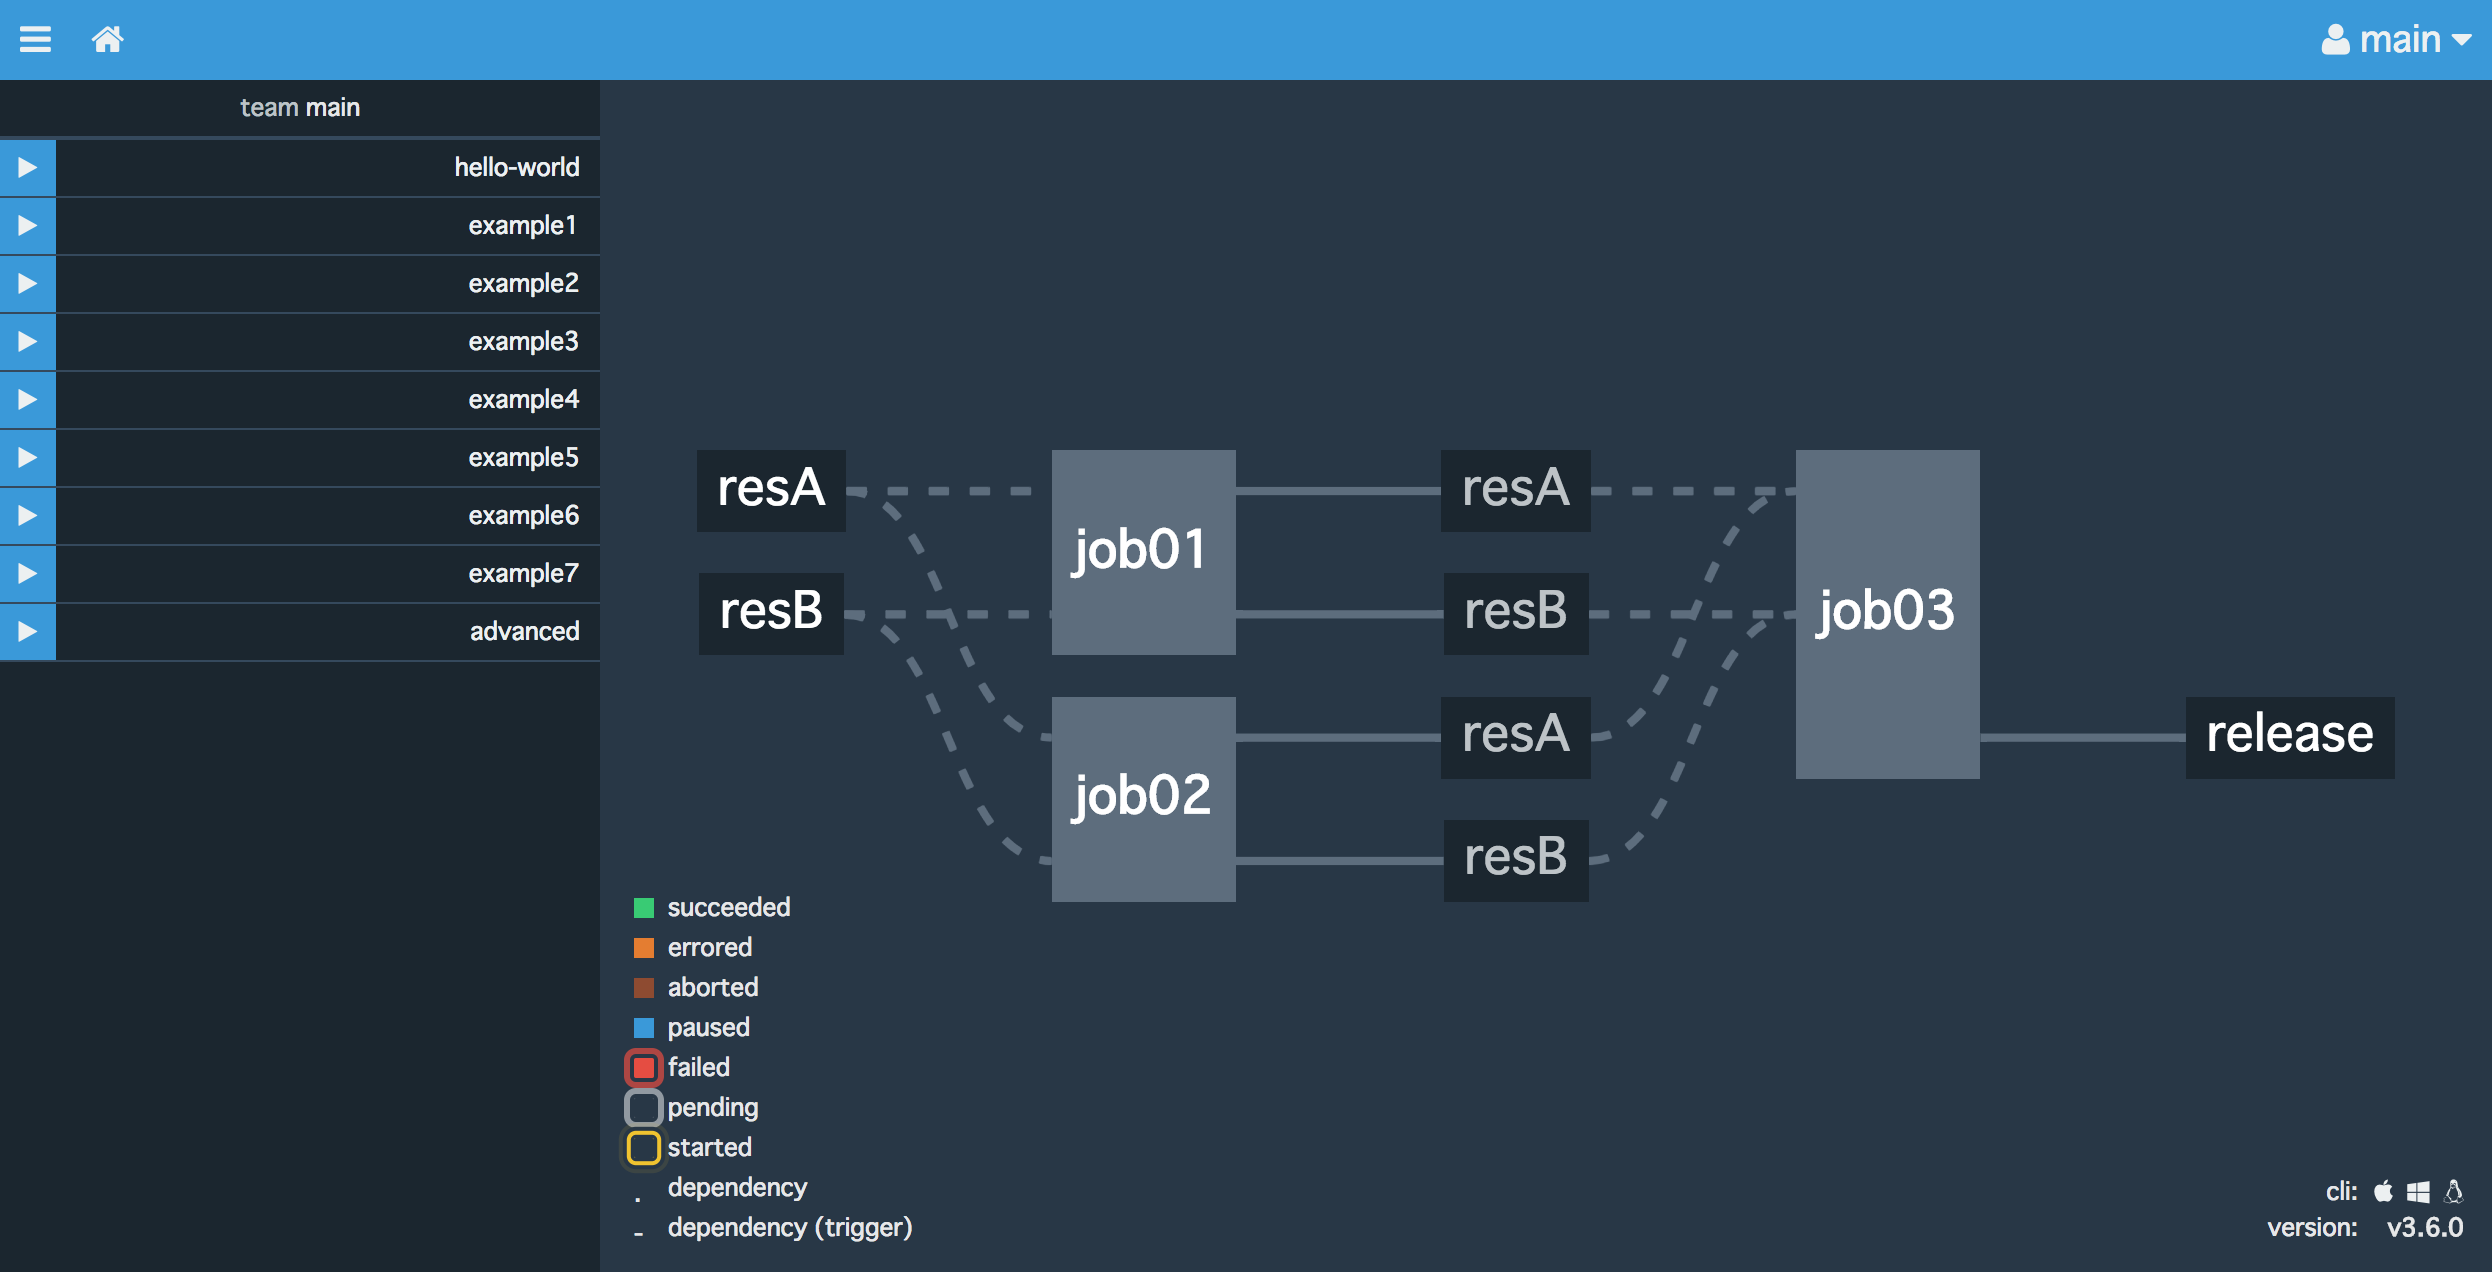 screencapture-localhost-8080-teams-main-pipelines-example7-1512699920130.png